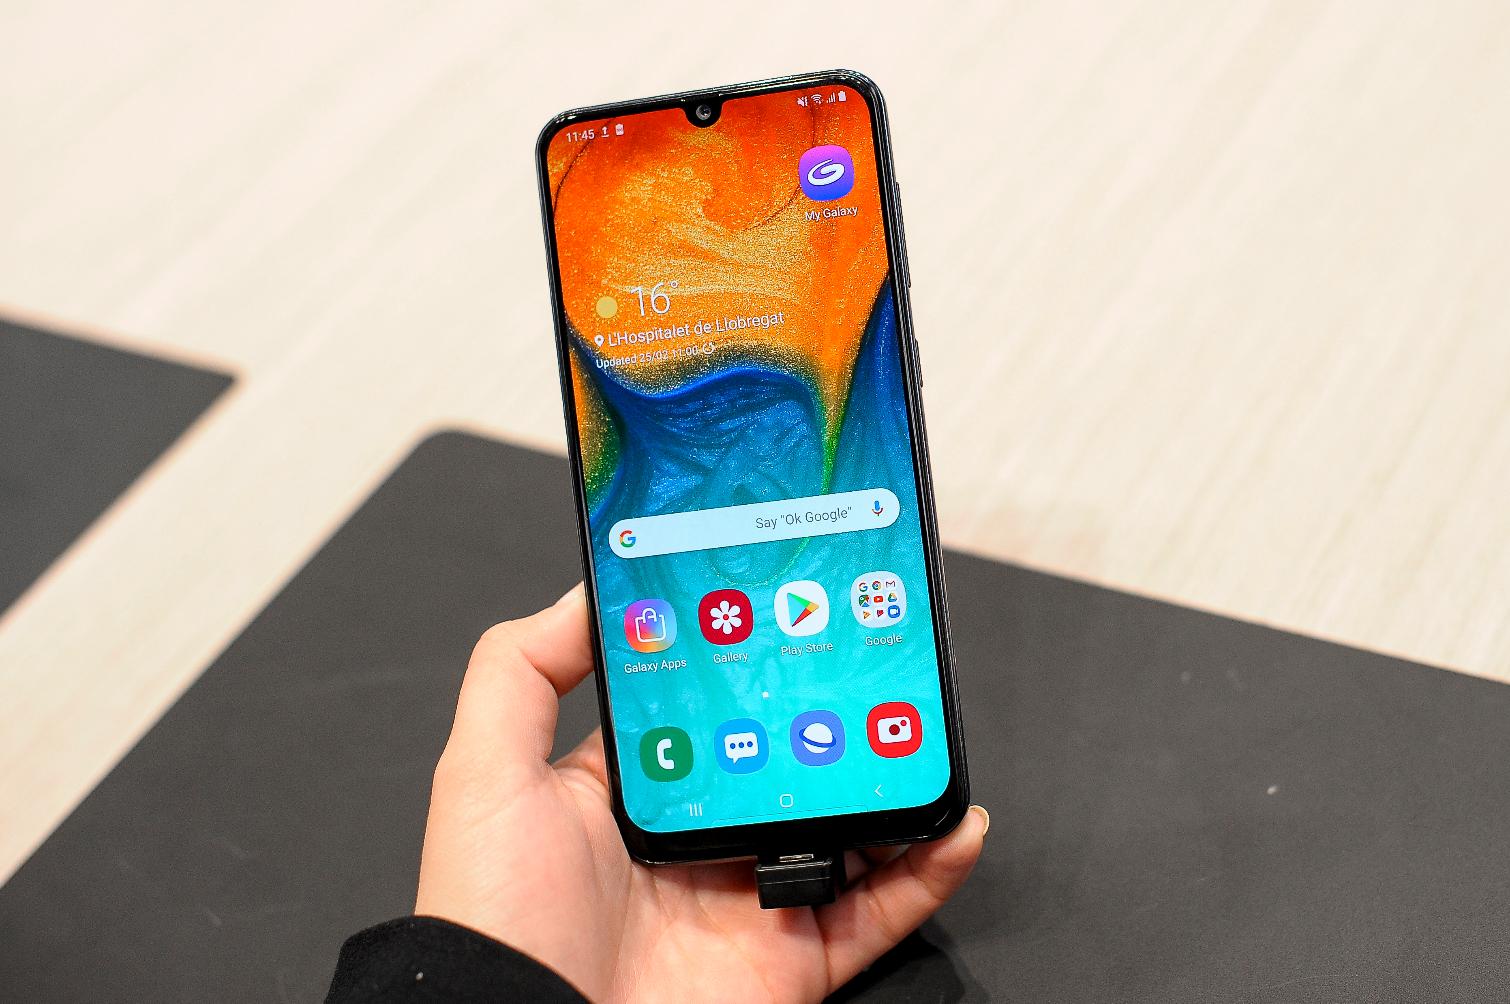 Samsung Is Releasing a ‘Good Enough’ Galaxy in US to Fight the Pixel 3a